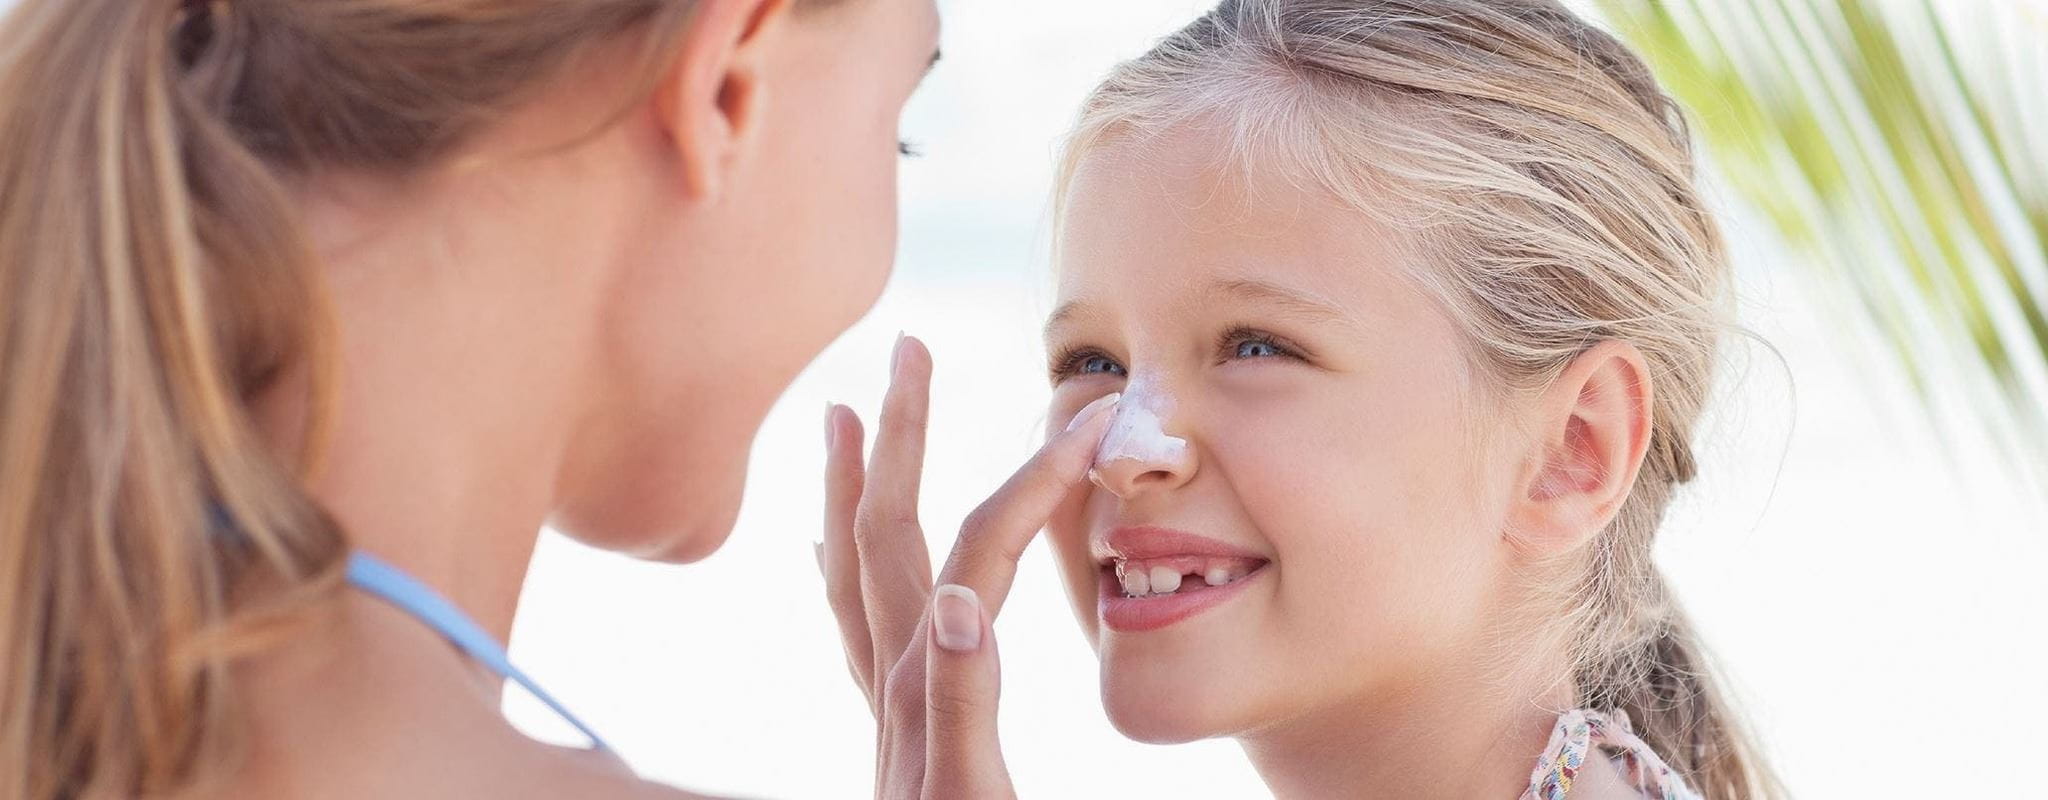 Mother playfully applying sunscreen on her daughter's face